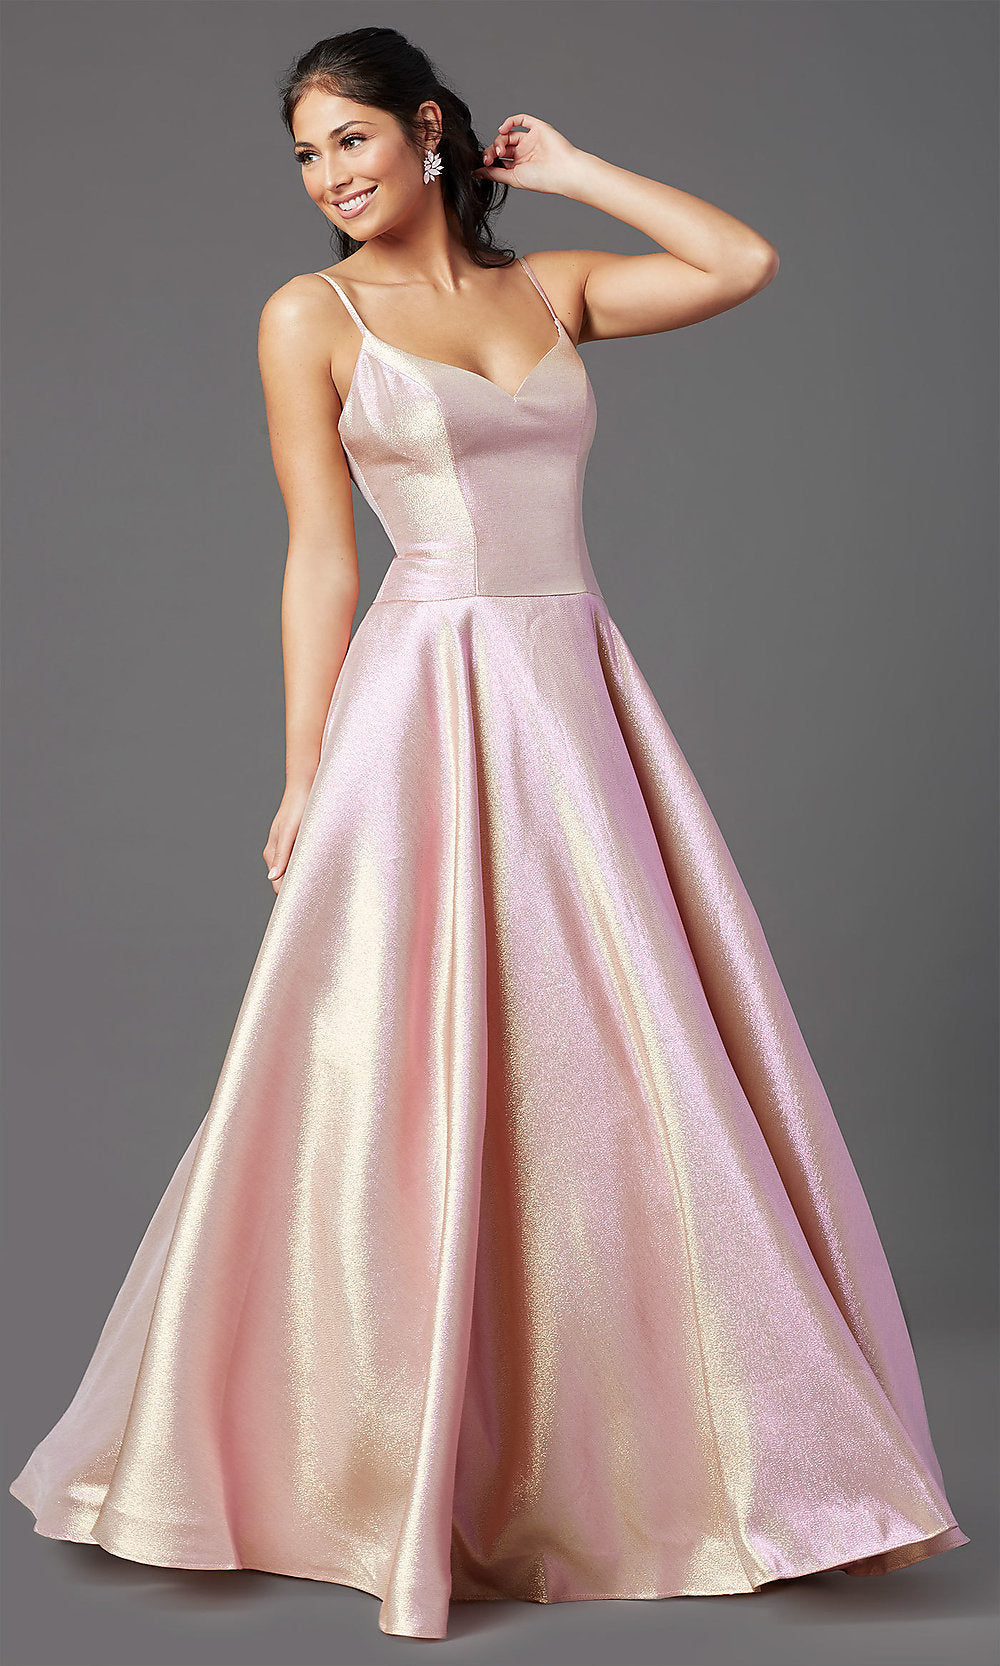 Gold Pink Long Glitter A-Line Formal Prom Dress by PromGirl